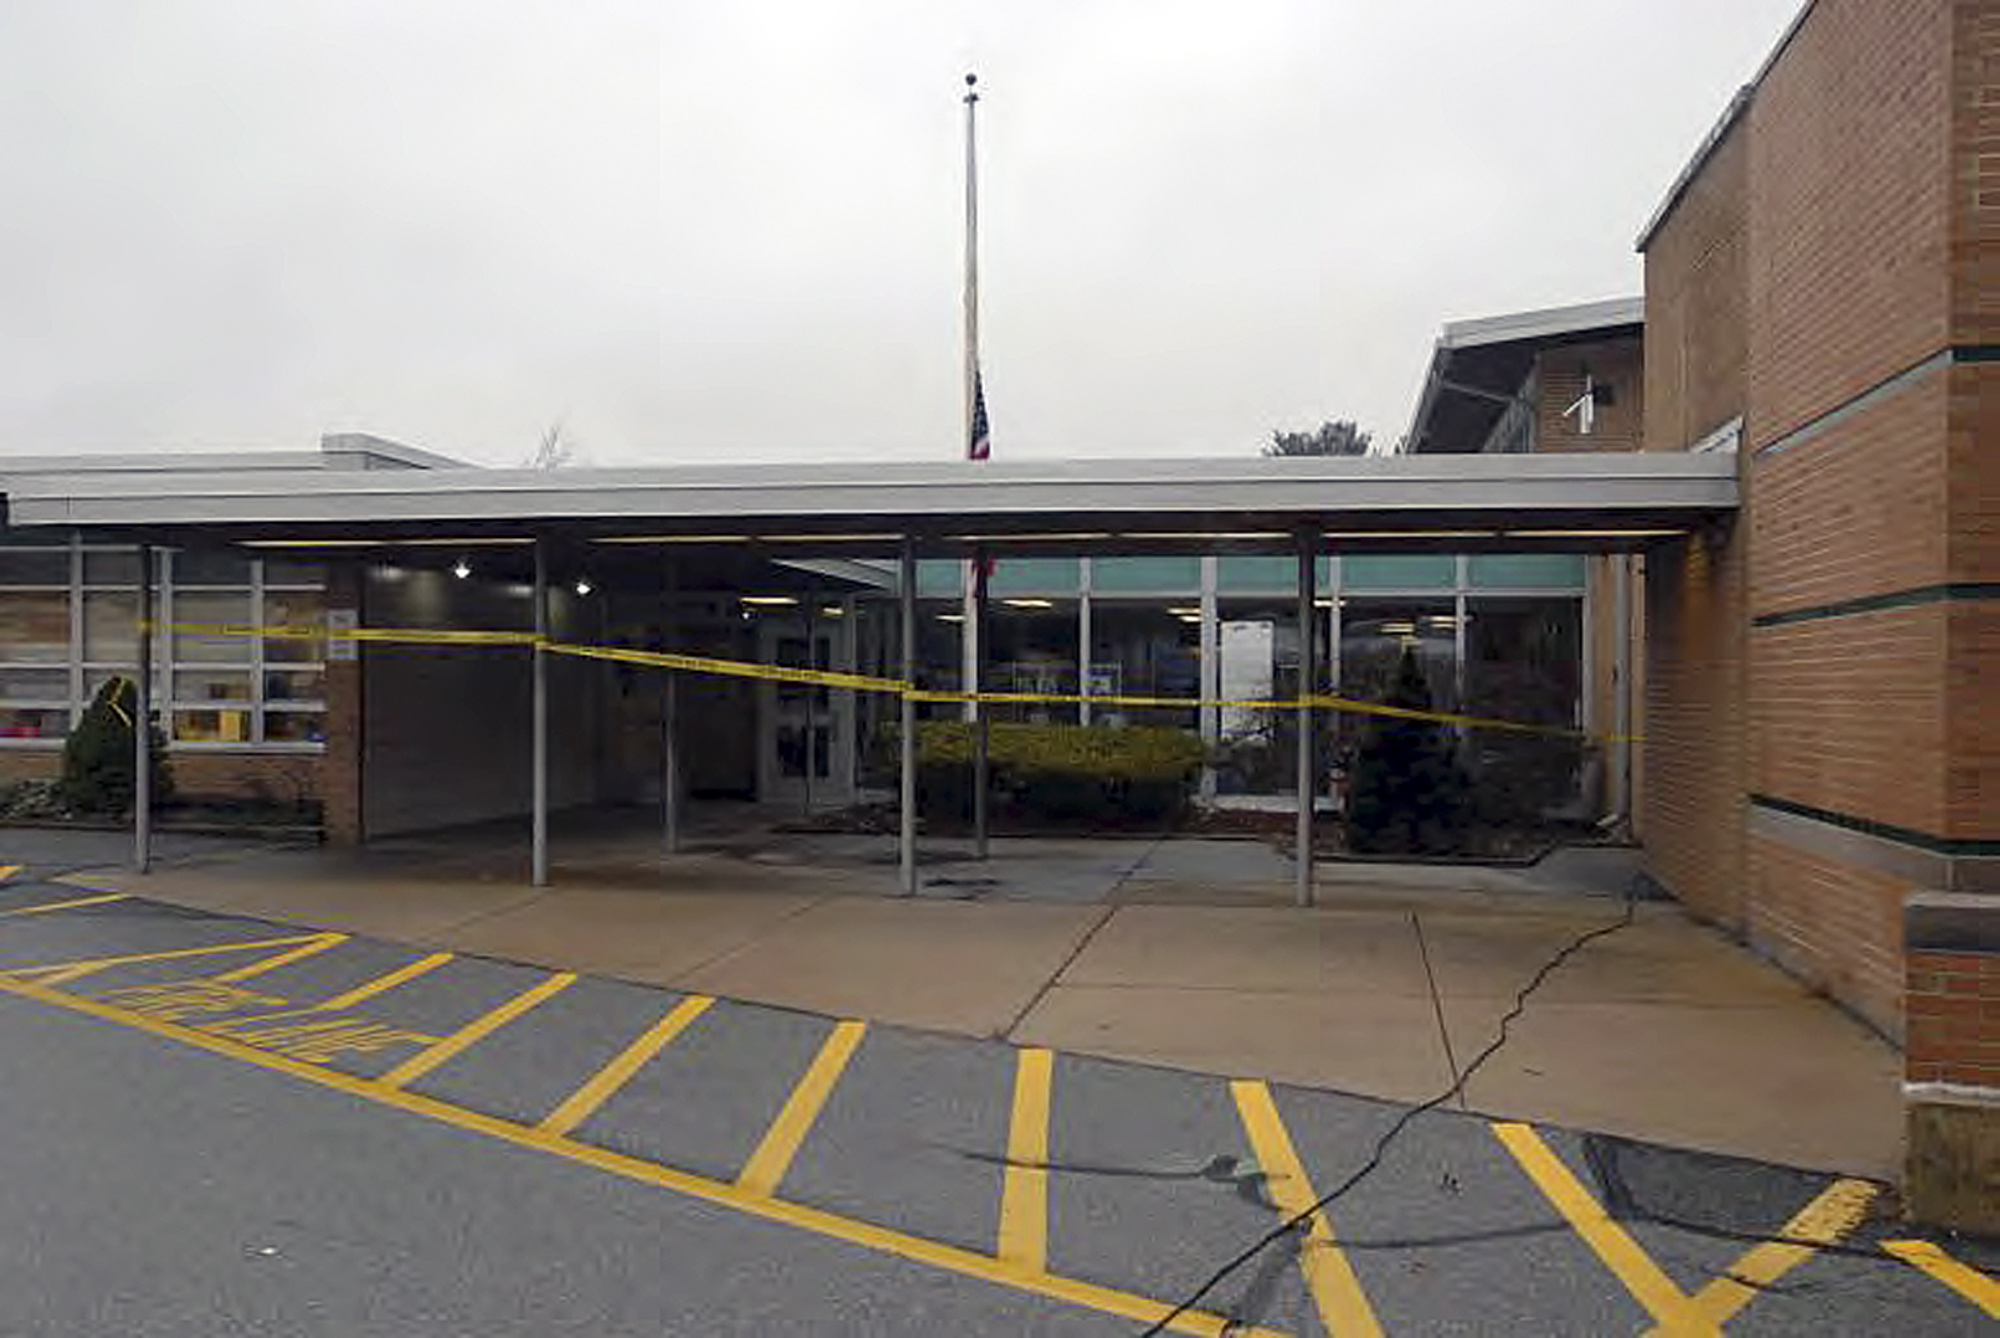 Office of the Connecticut State's Attorney Judicial District of Danbury
The entrance to Sandy Hook Elementary School in Newtown, Conn., is pictured in a report on the killings released Monday. The building has been demolished.